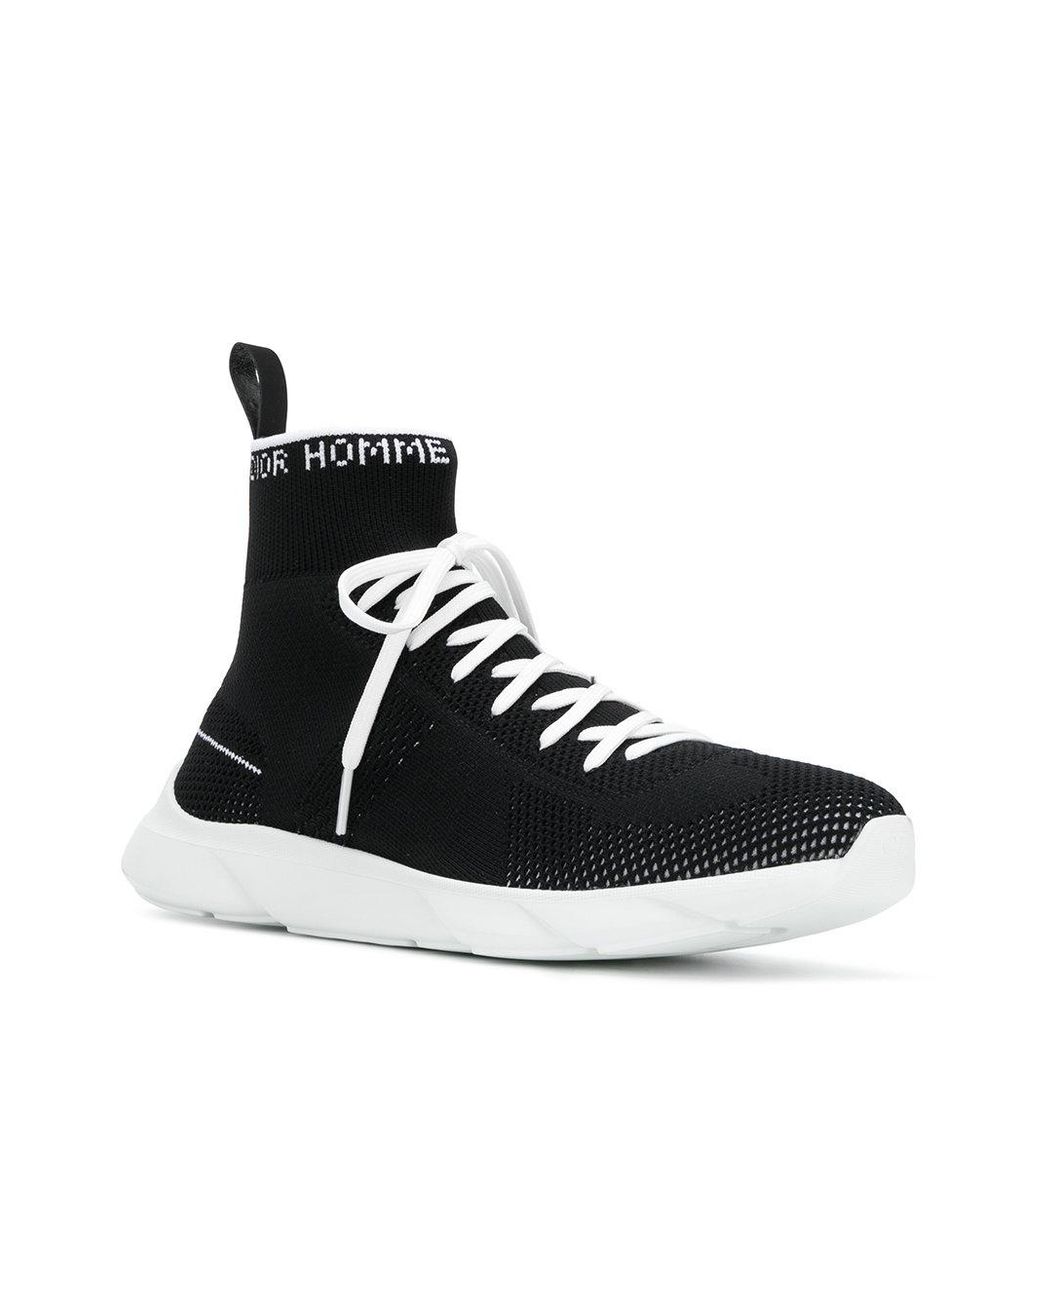 Dior Homme Leather High Top Sock Sneakers in Black for Men | Lyst